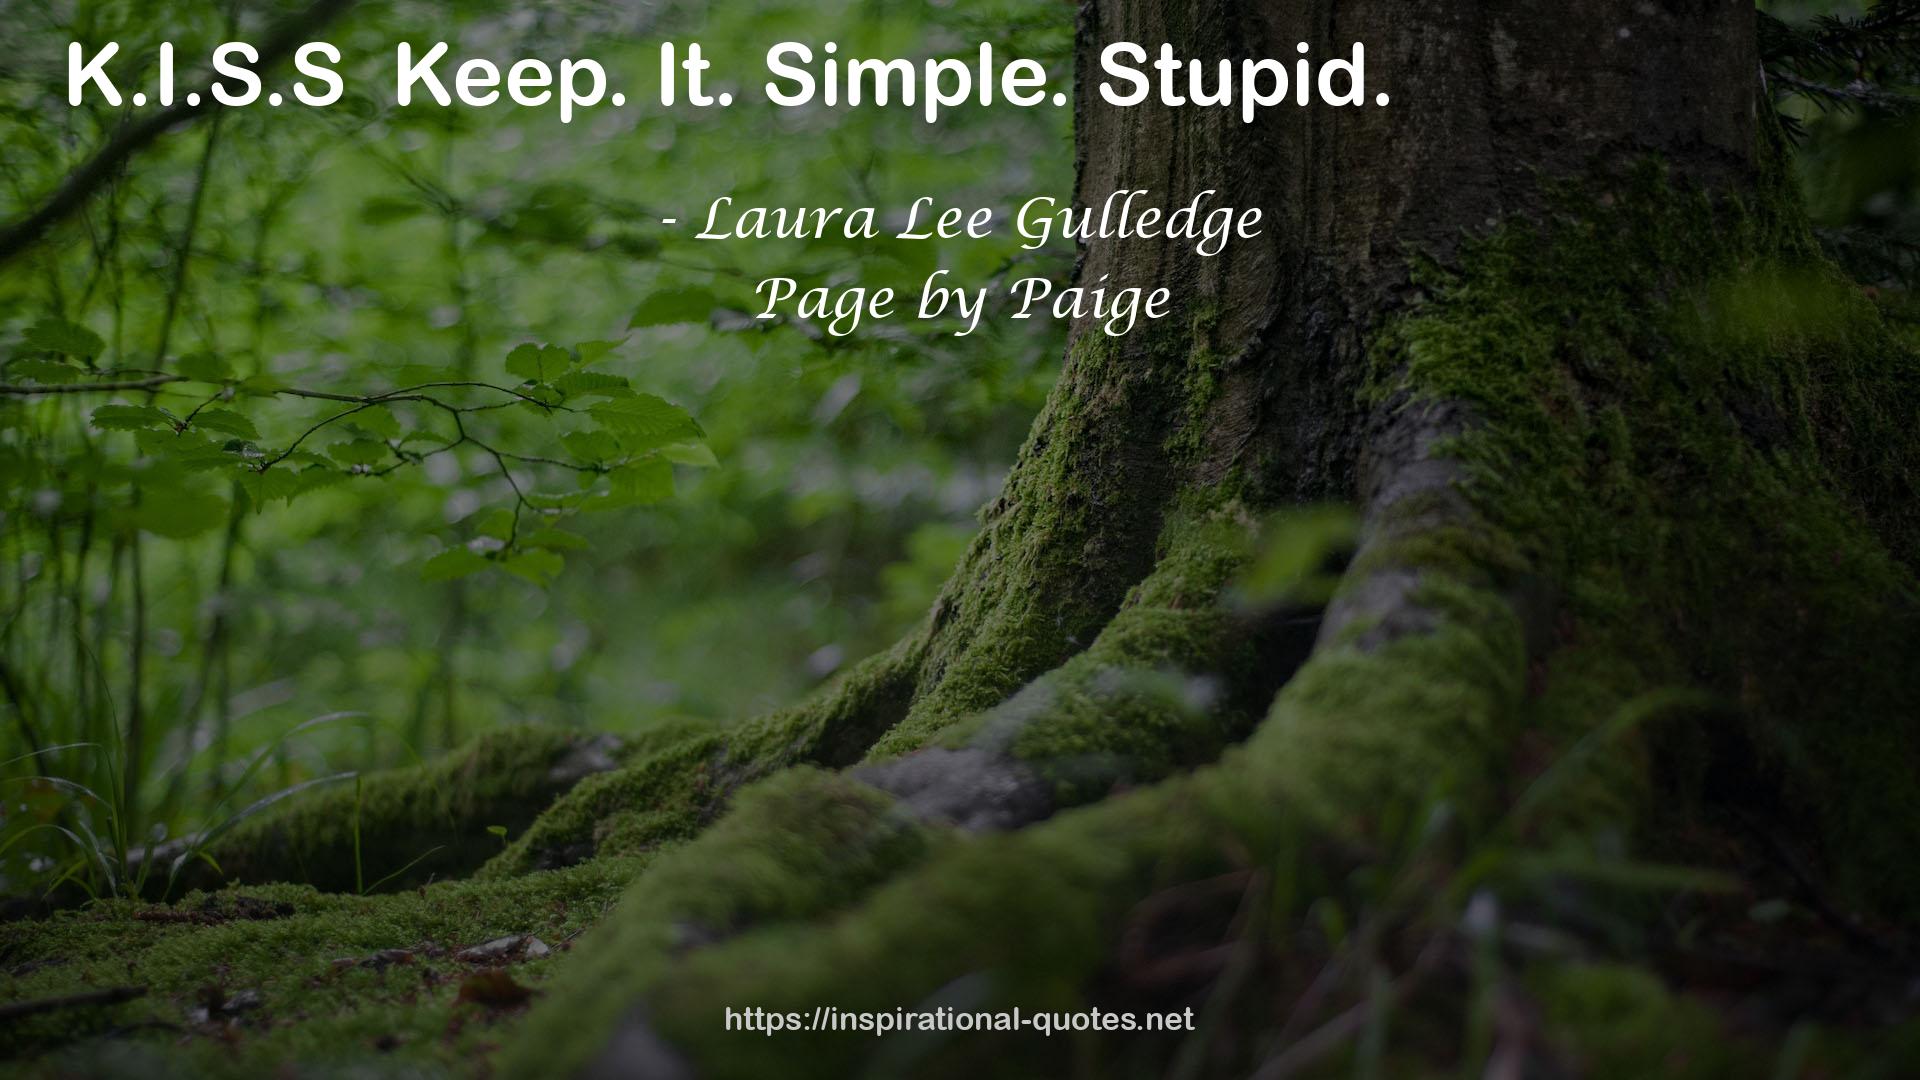 Laura Lee Gulledge QUOTES